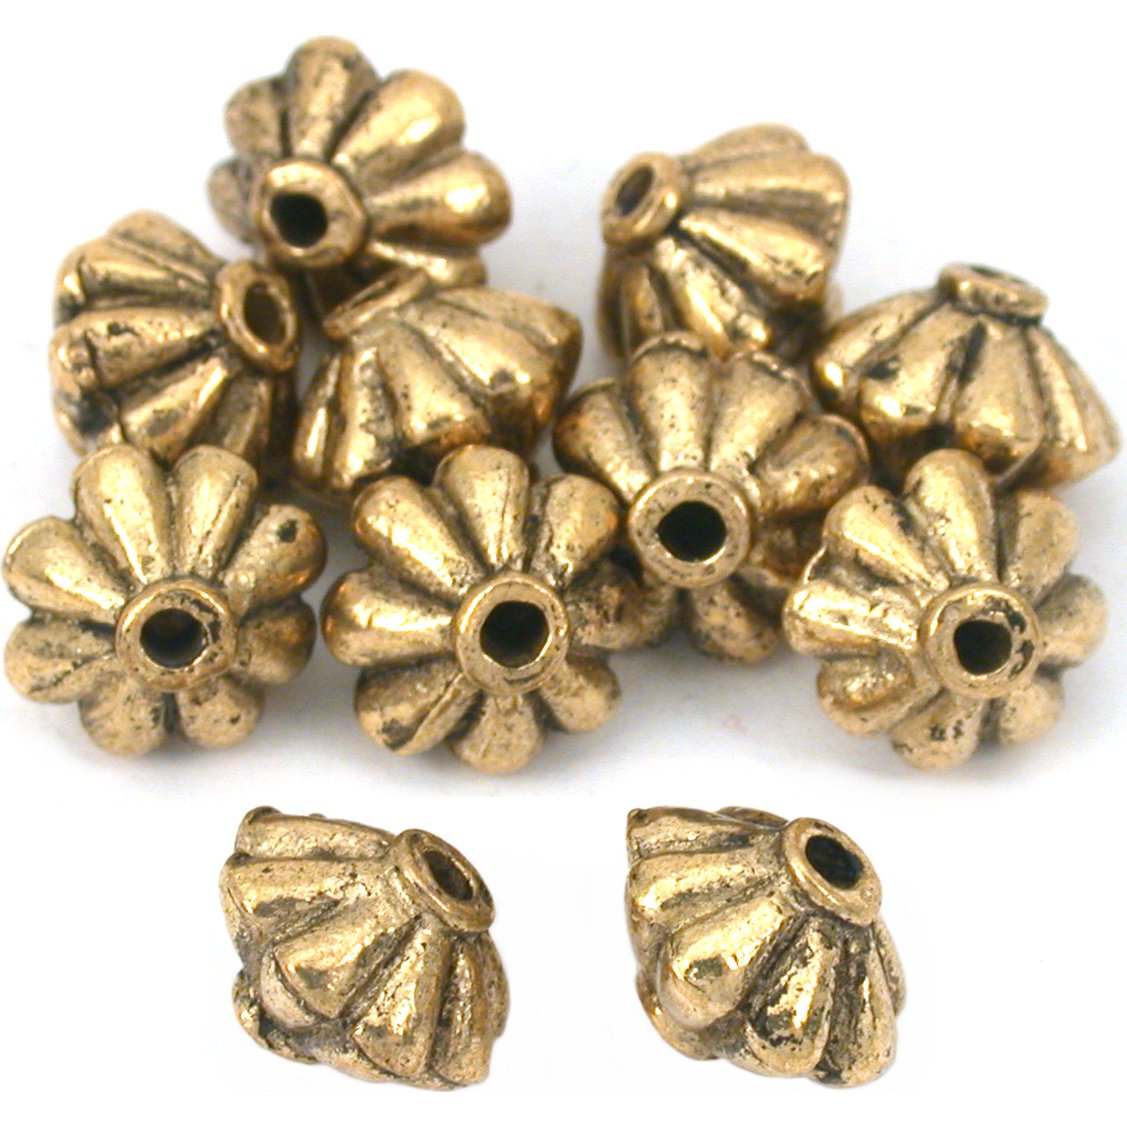 Bali Fluted Saucer Antique Gold Plated Beads 9mm 10Pcs Approx.